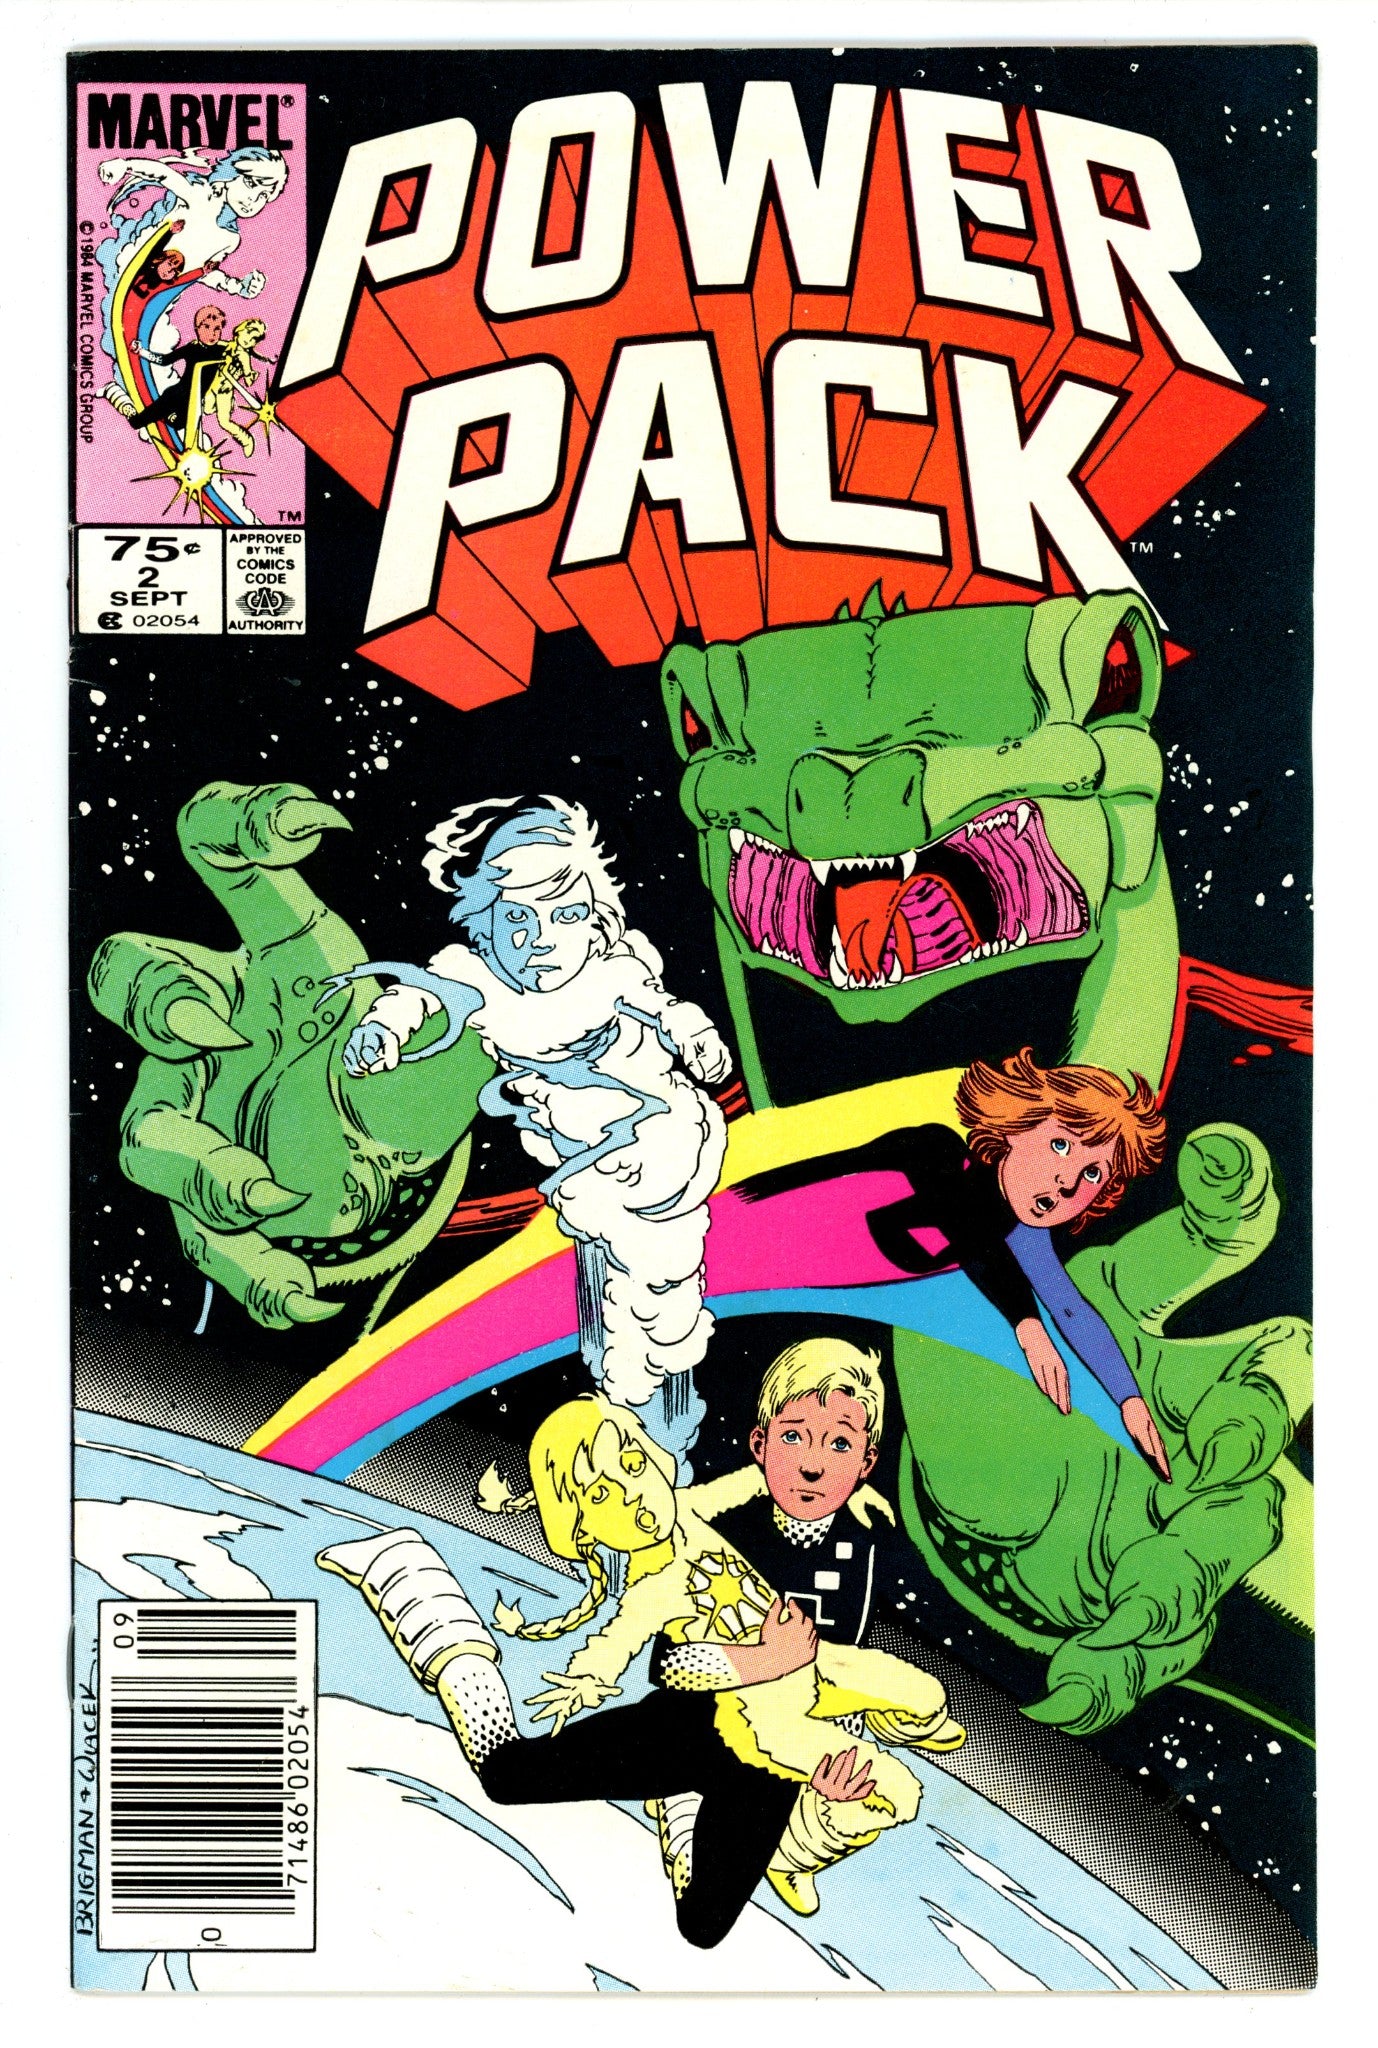 Power Pack Vol 1 2 FN- (5.5) (1984) Canadian Price Variant 